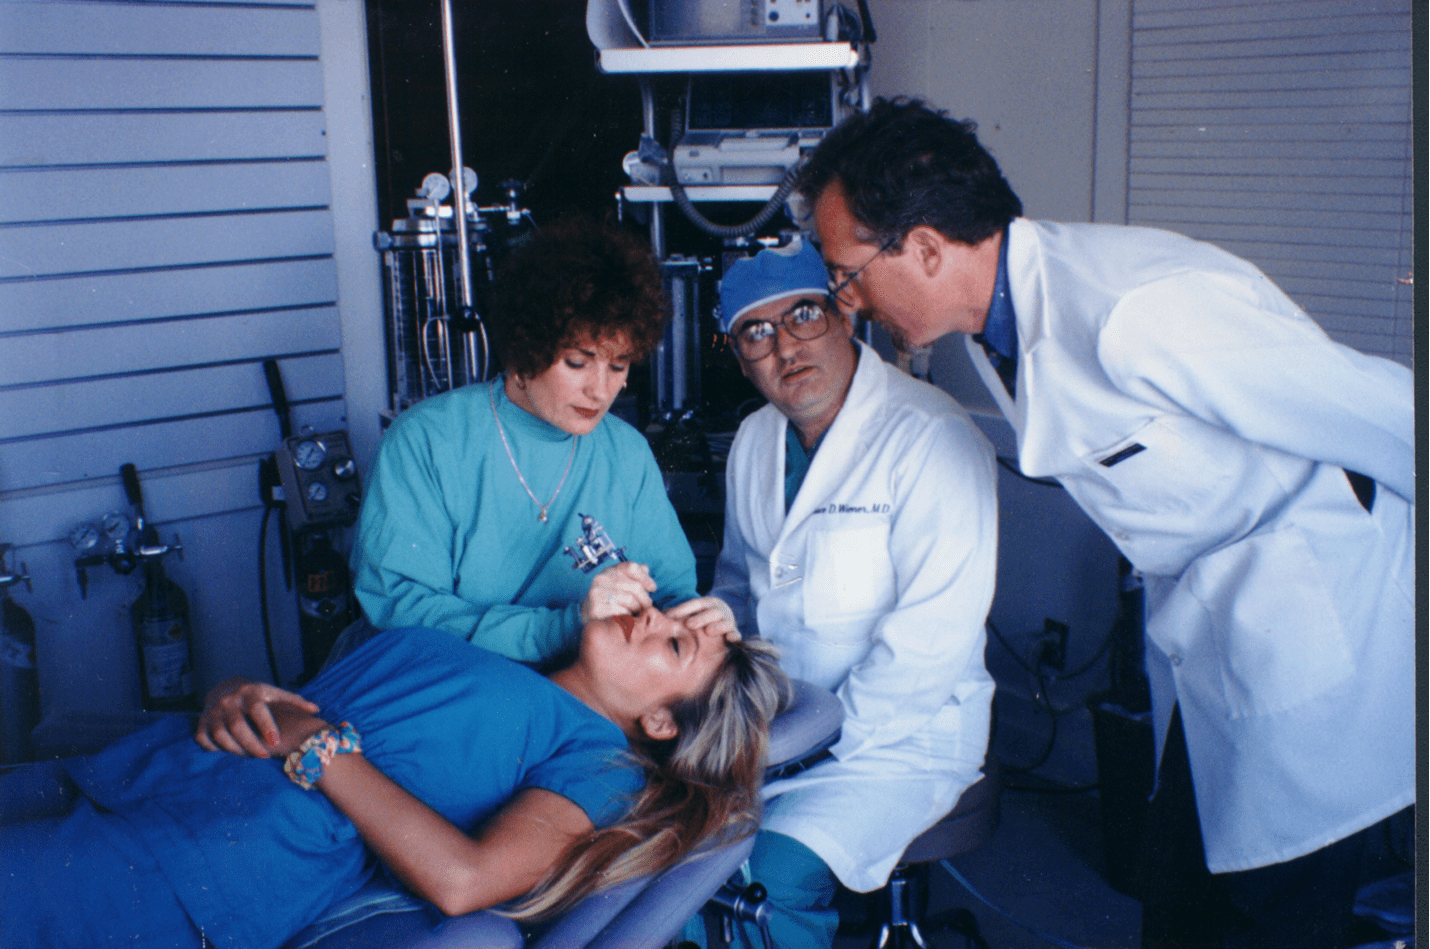 Susan Church performing an eyeliner procedure in the operating room.